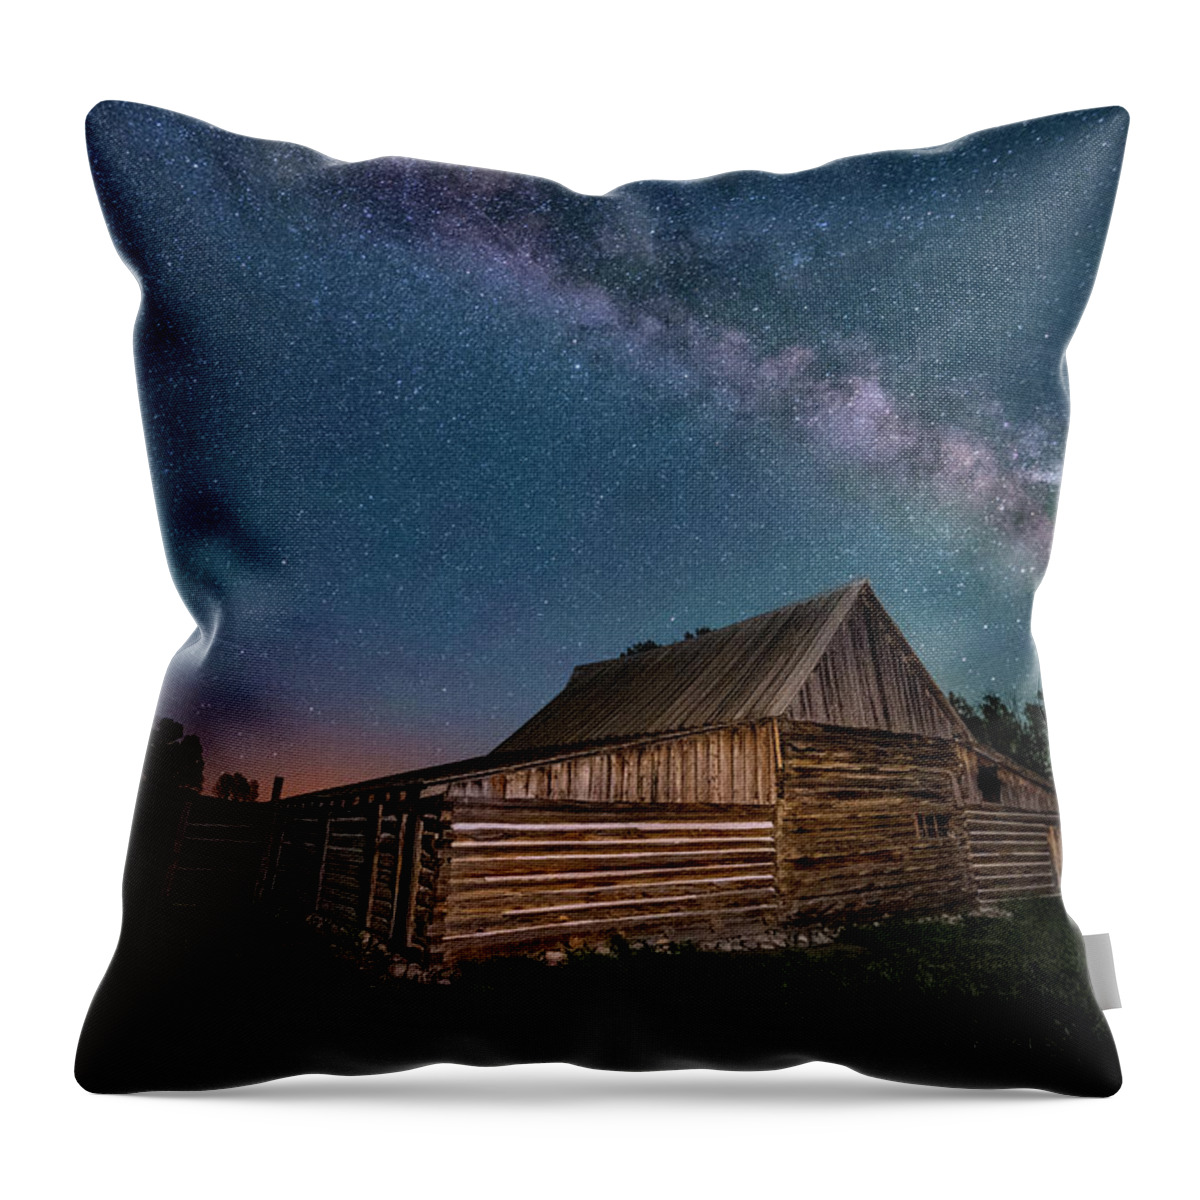 Mormon Row Throw Pillow featuring the photograph Milky Way Over Moulton Barn by Michael Ash